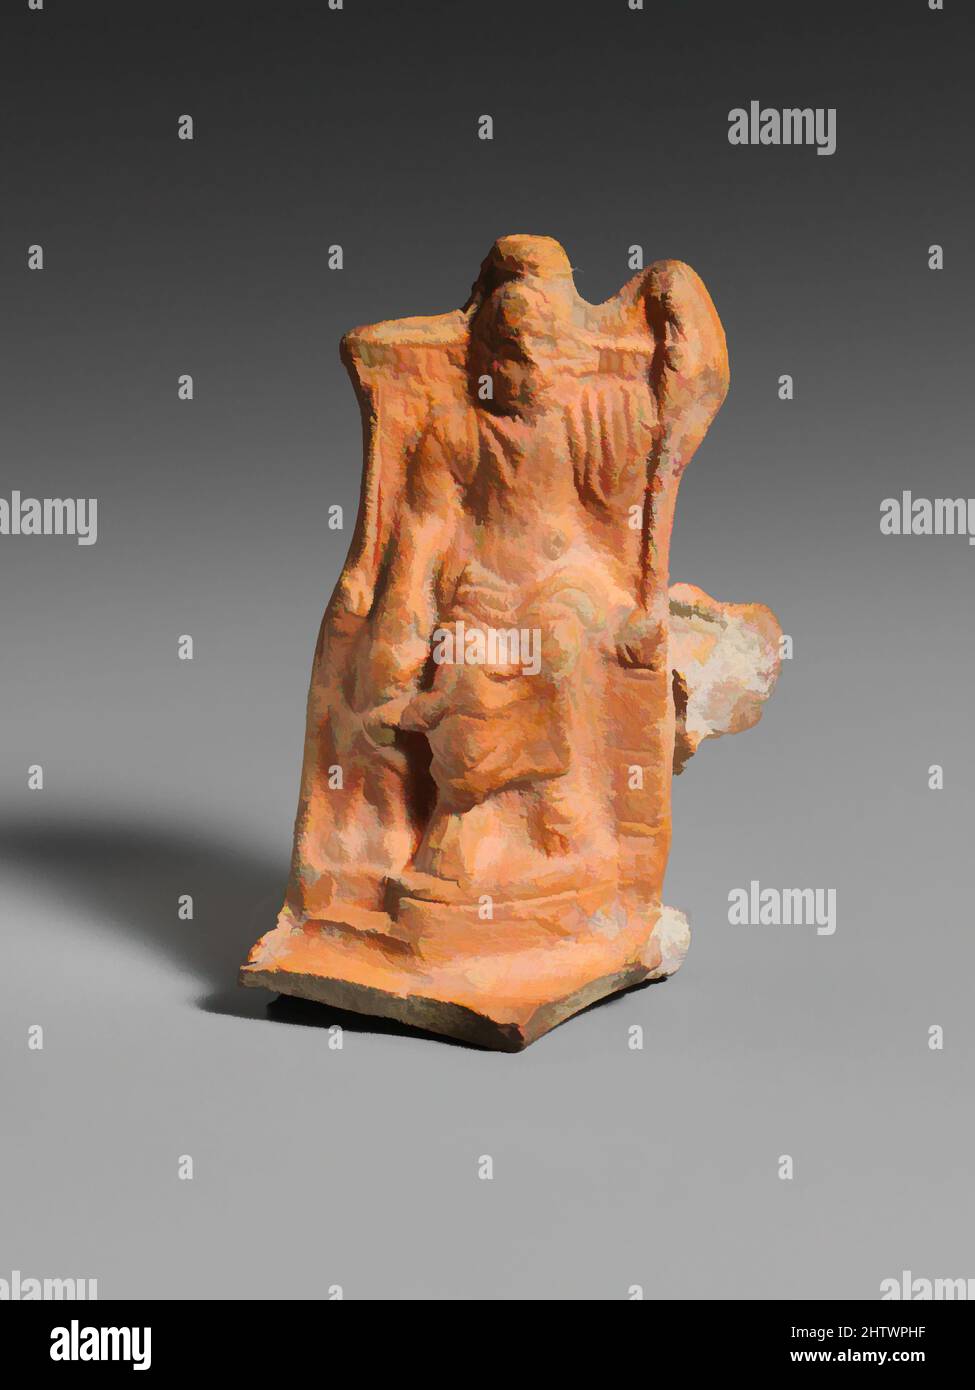 Art inspired by Terracotta lamp handle, Imperial, 2nd century A.D., Roman, Terracotta, L. 2 5/8 in. (6.7 cm.), Vases, Zeus Serapis, enthroned, holds a scepter in his left hand and rests his right hand on the head of Cerberos, the guard dog of Hades. Since the Roman Serapis is equated, Classic works modernized by Artotop with a splash of modernity. Shapes, color and value, eye-catching visual impact on art. Emotions through freedom of artworks in a contemporary way. A timeless message pursuing a wildly creative new direction. Artists turning to the digital medium and creating the Artotop NFT Stock Photo